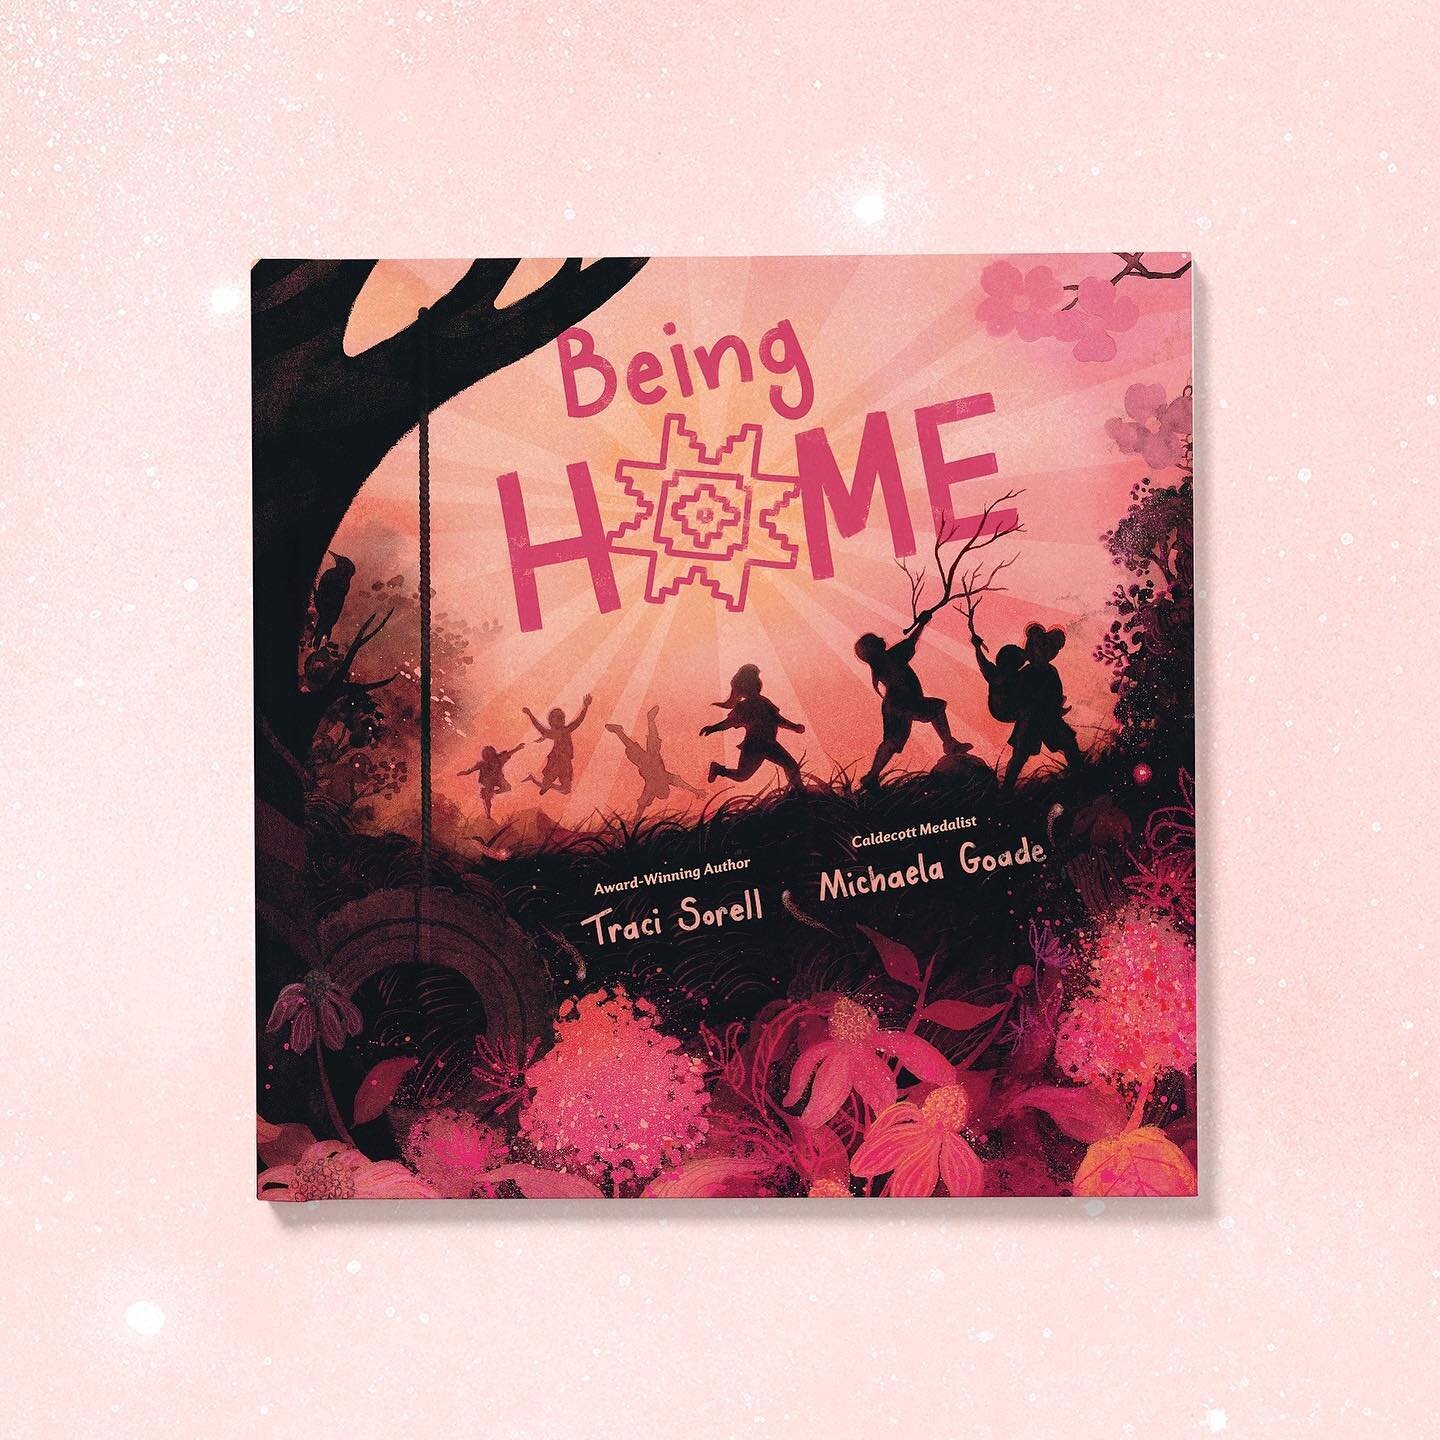 The cover for my next book collaboration was recently released, and I&rsquo;m excited to share it here with you all. Please enjoy this first official glimpse of BEING HOME, written by Traci Sorell and published by @kokilabooks, coming out May 7, 2024